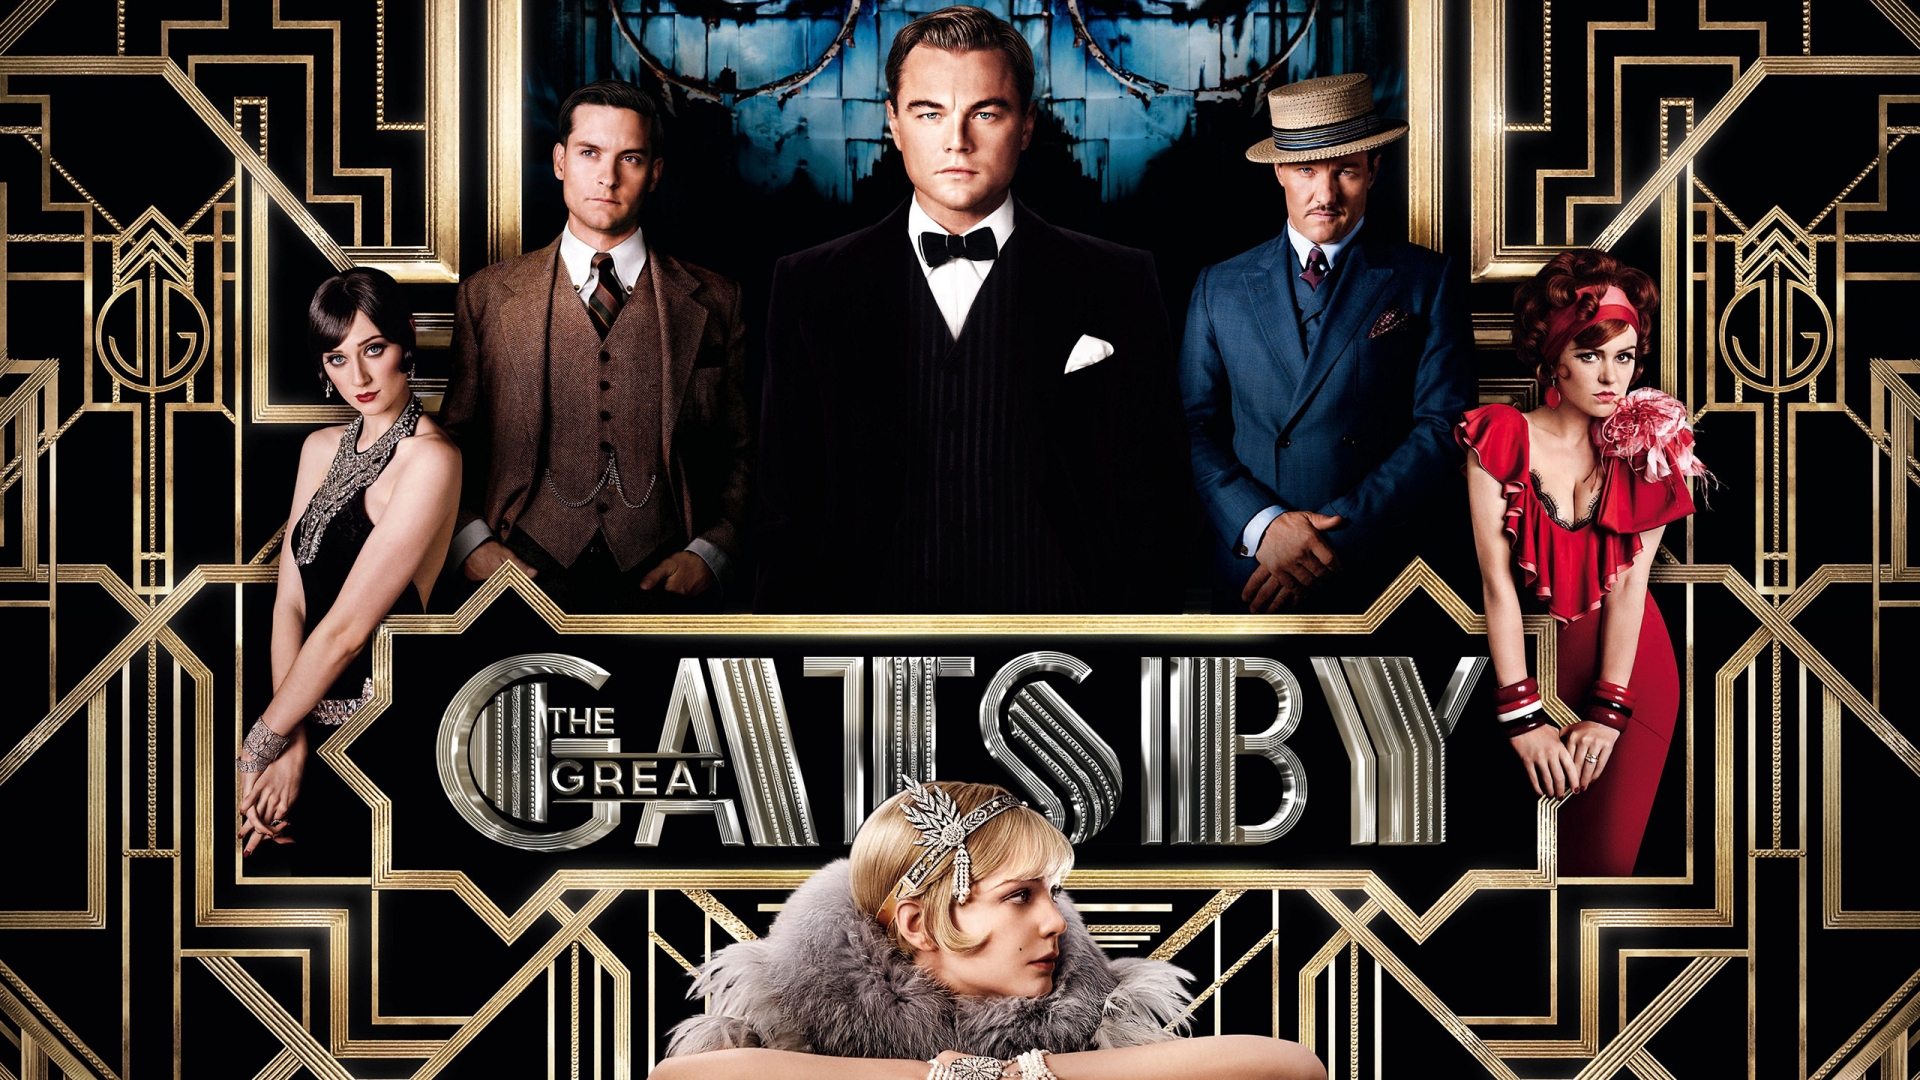 The Great Gatsby Movie for 1920 x 1080 HDTV 1080p resolution